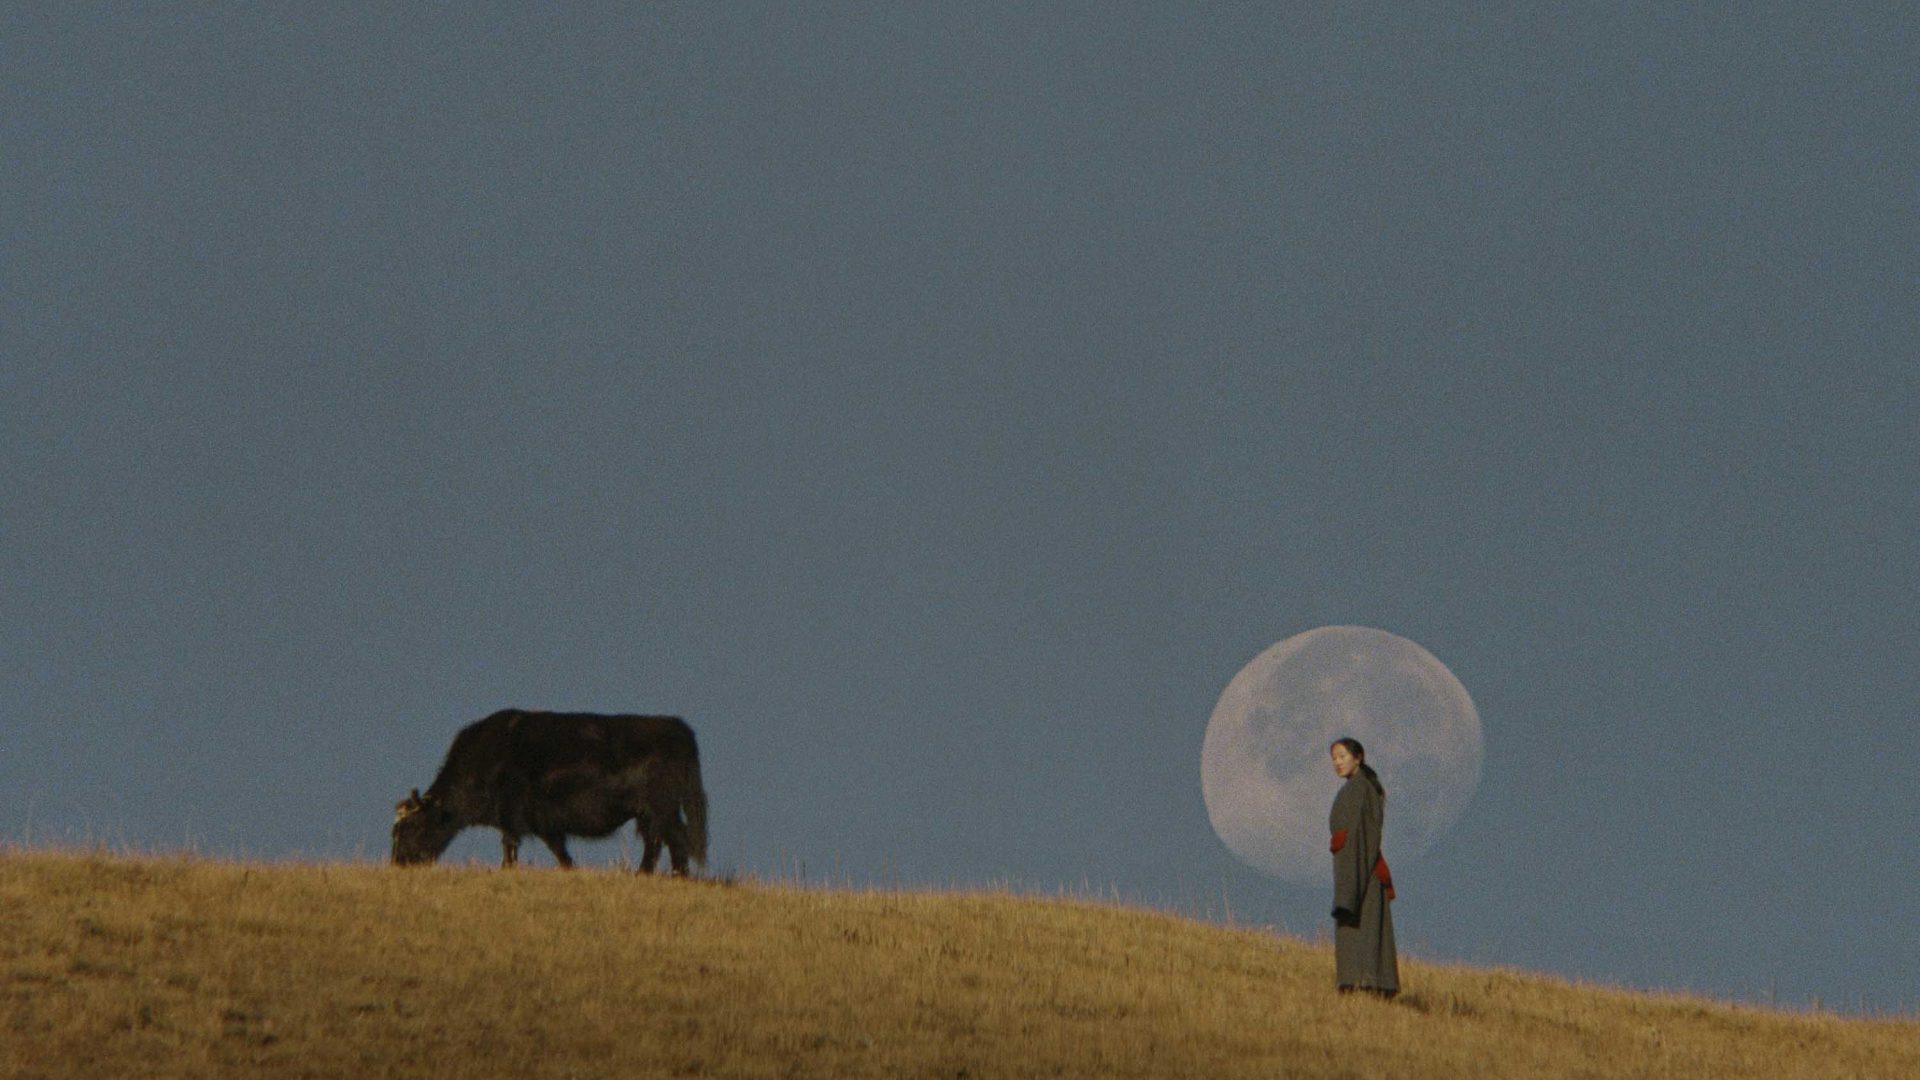 A woman stands in front of the rising moon. There is a cow grazing in front of her.